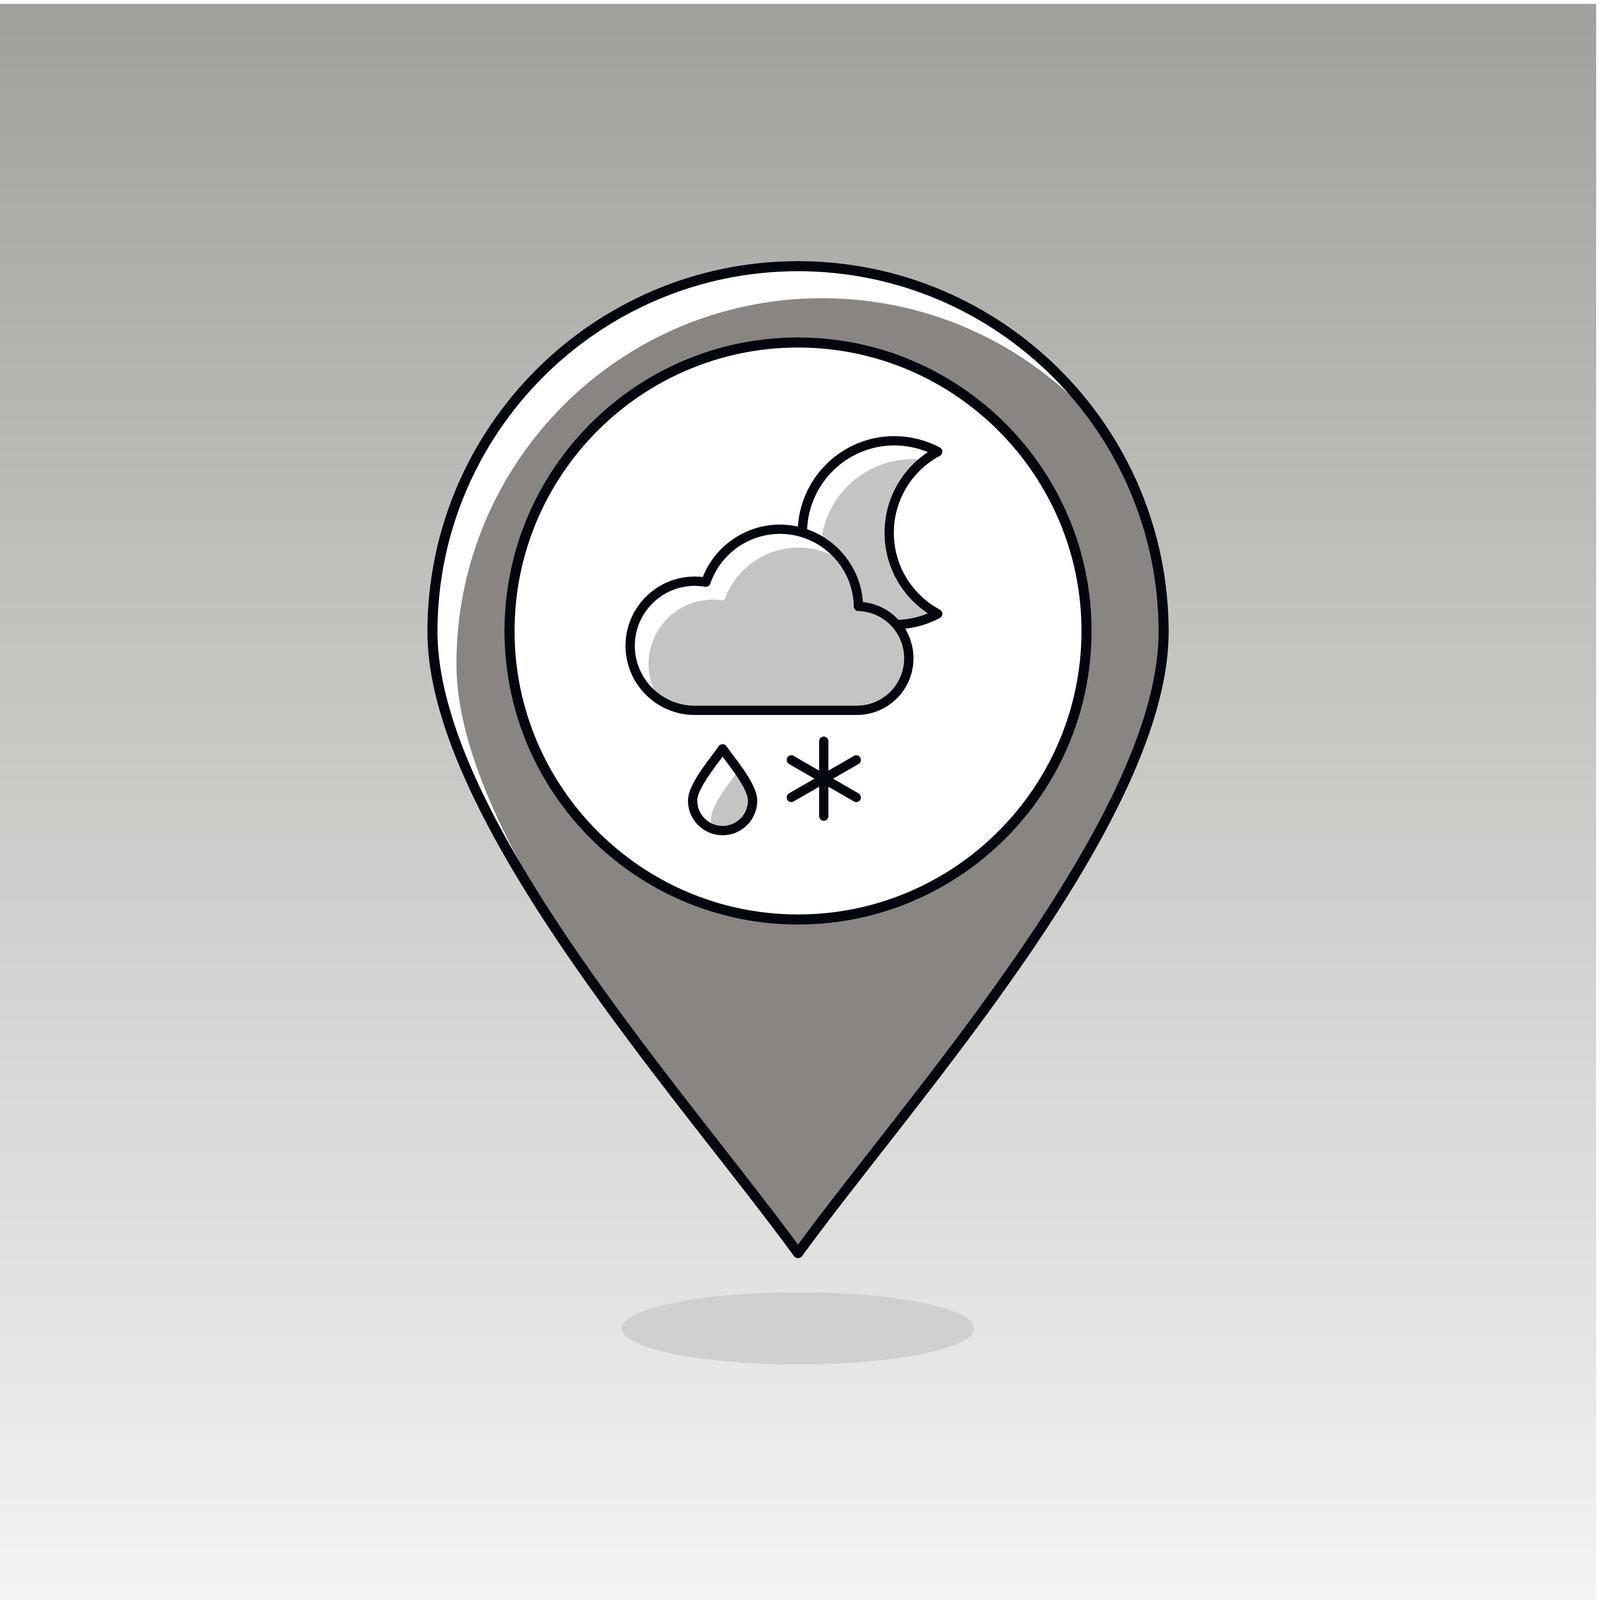 Cloud with Snow and Rain Moon outline pin map icon. Map pointer. Map markers. Sleep night dreams symbol. Meteorology. Weather. Vector illustration eps 10